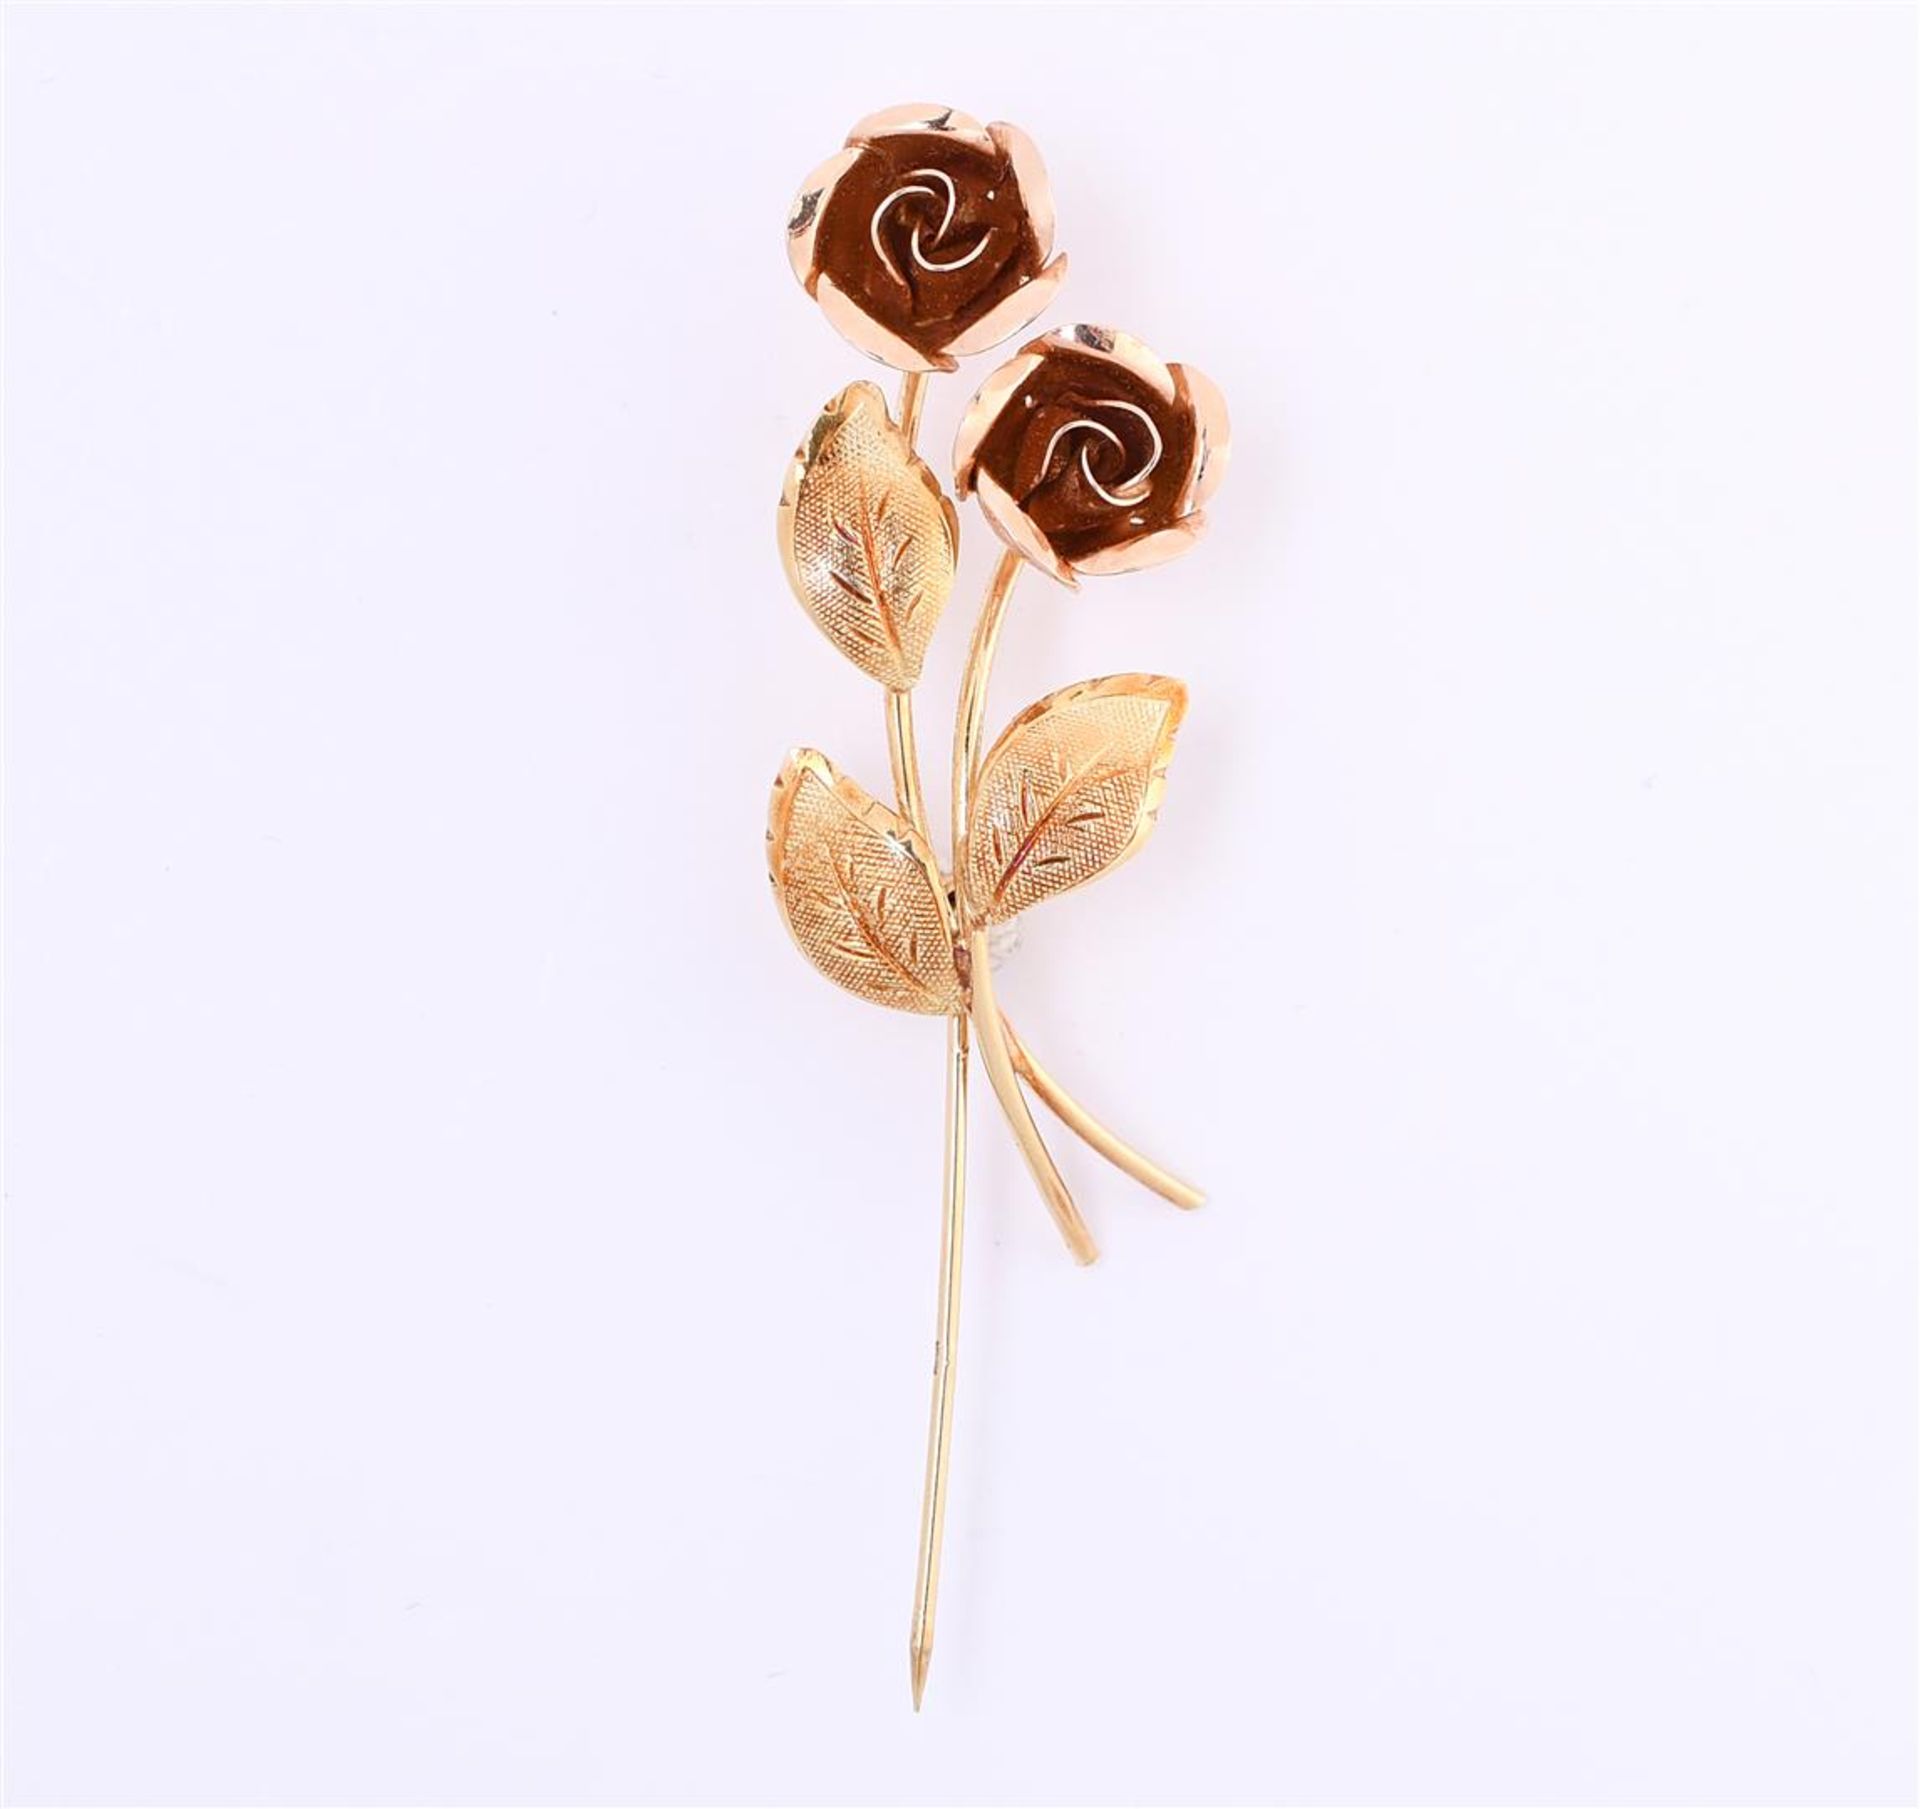 14 kt bicolor gold rose brooch, in the gold colors rose and yellow gold - Image 2 of 4